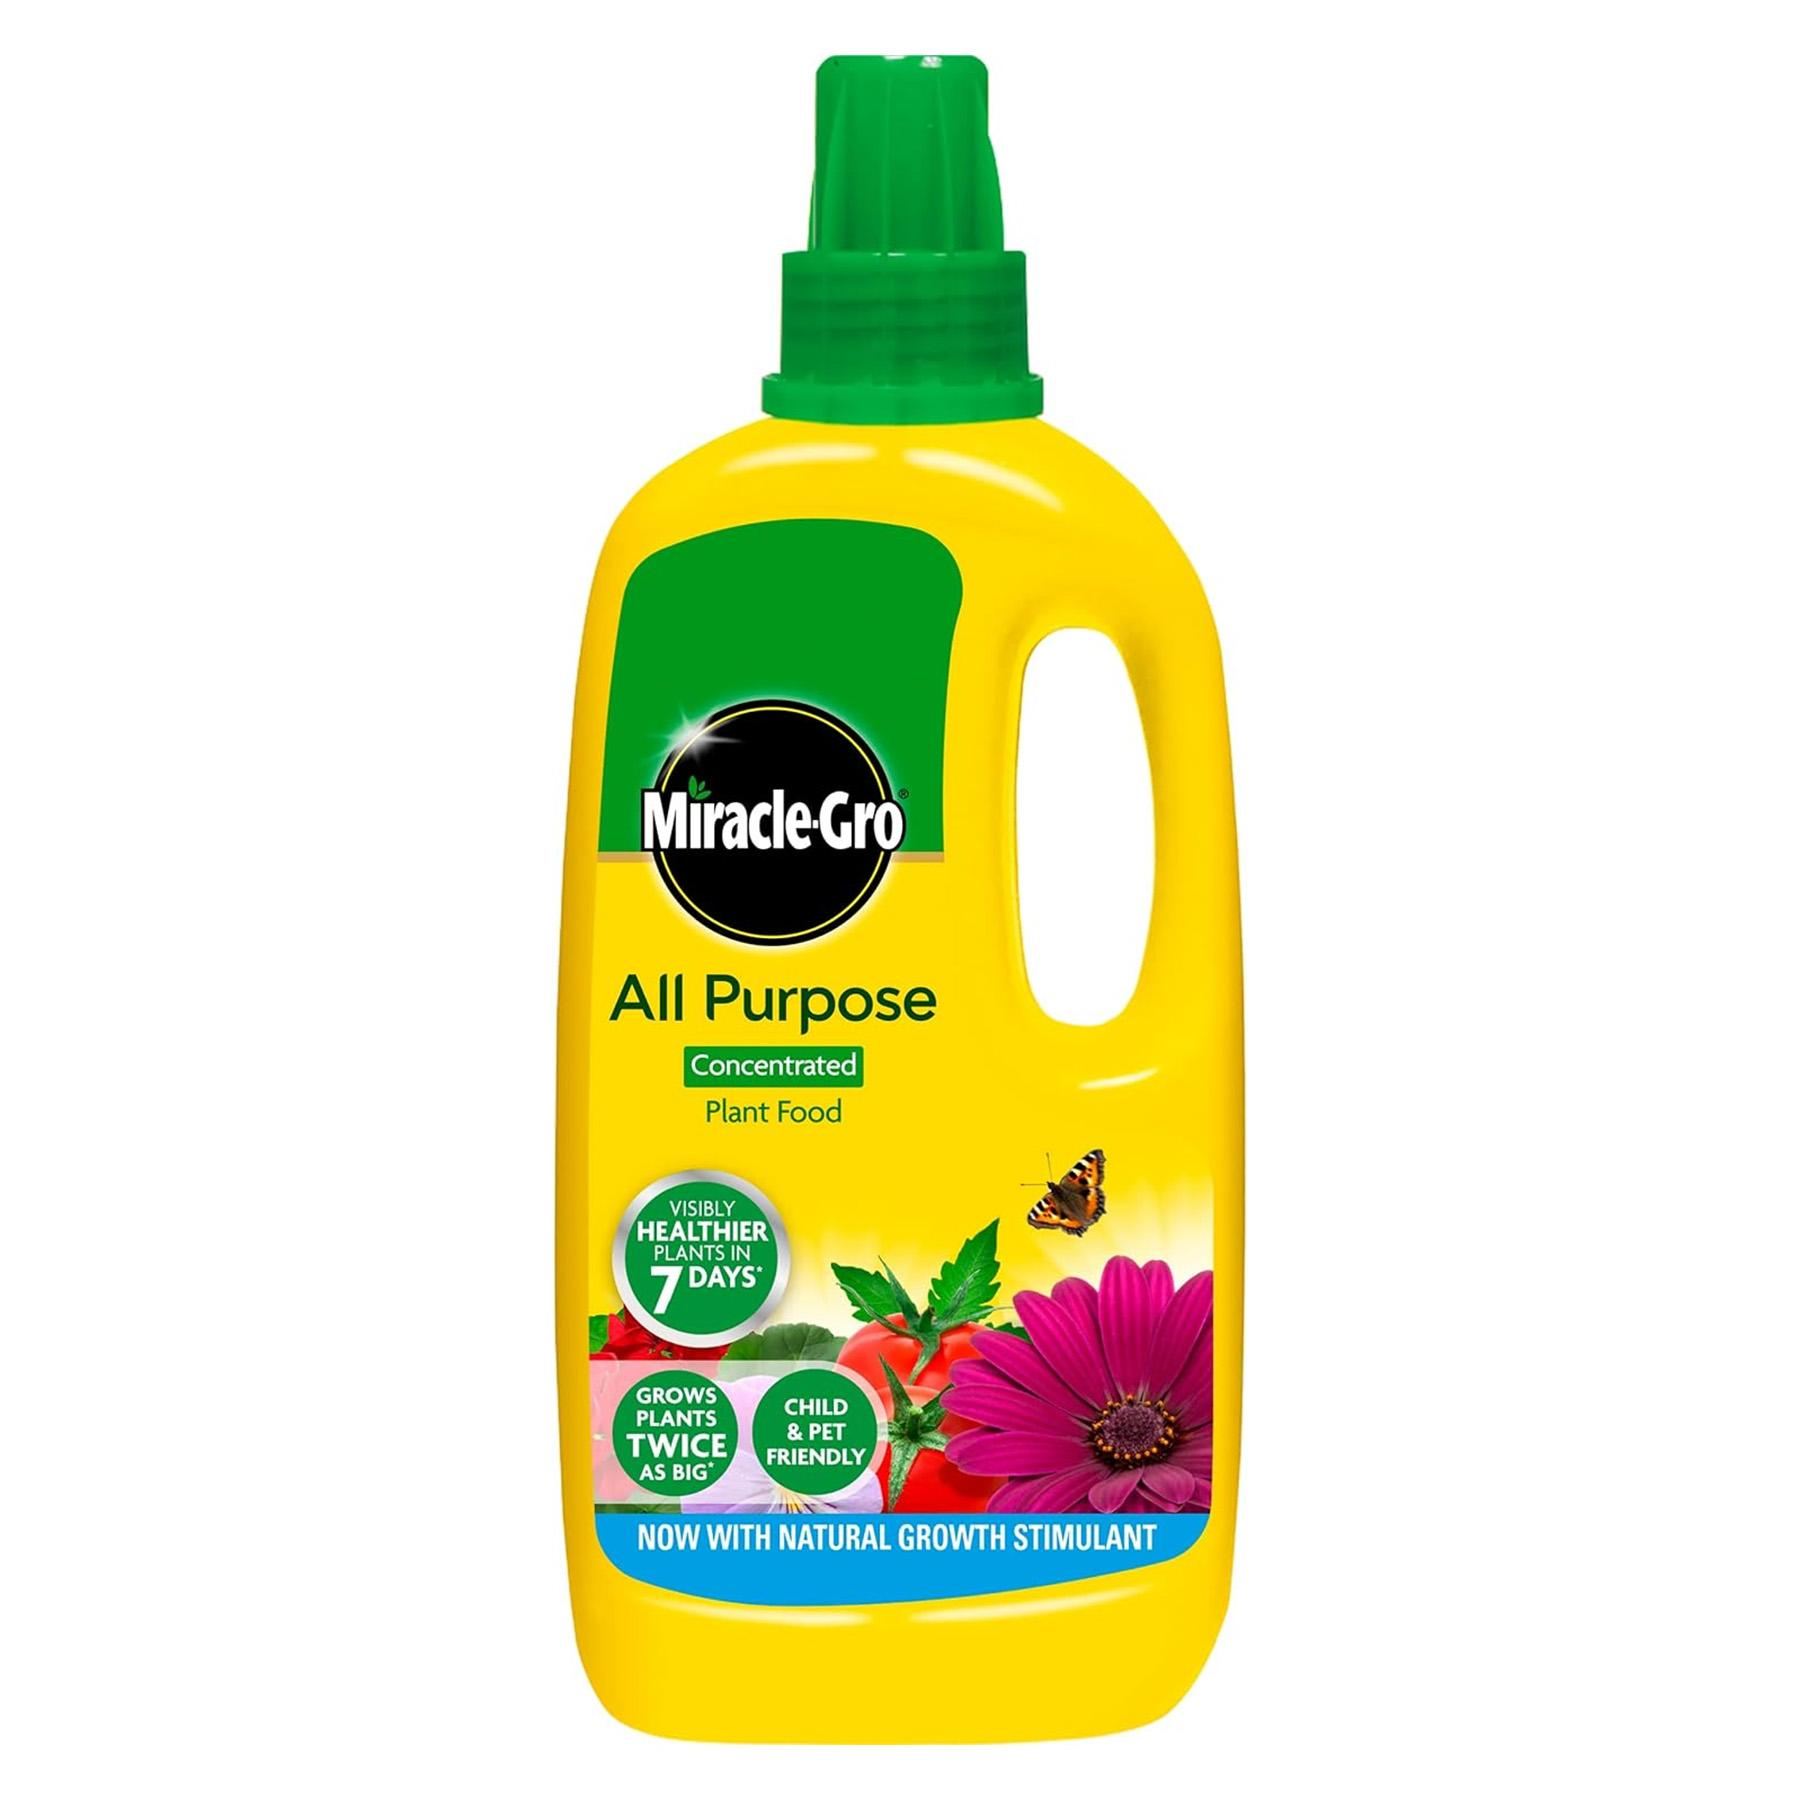 Miracle-Gro All Purpose Concentrated Liquid Plant Food, 1 Litre